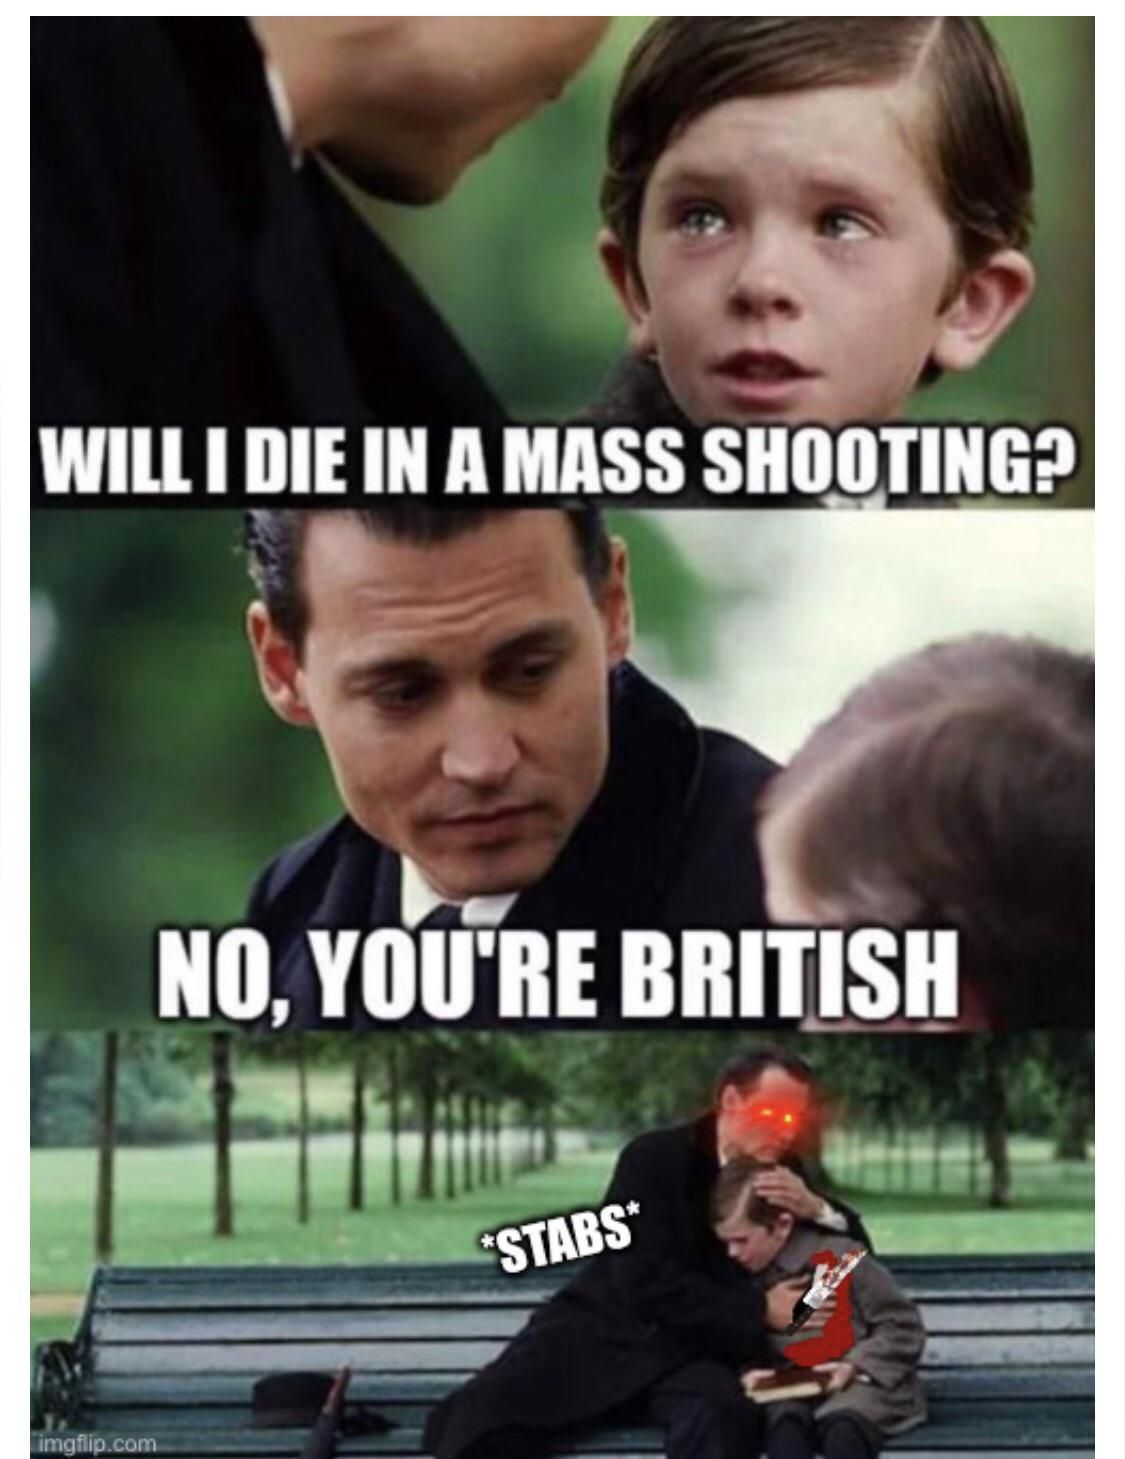 Those bloody Brits